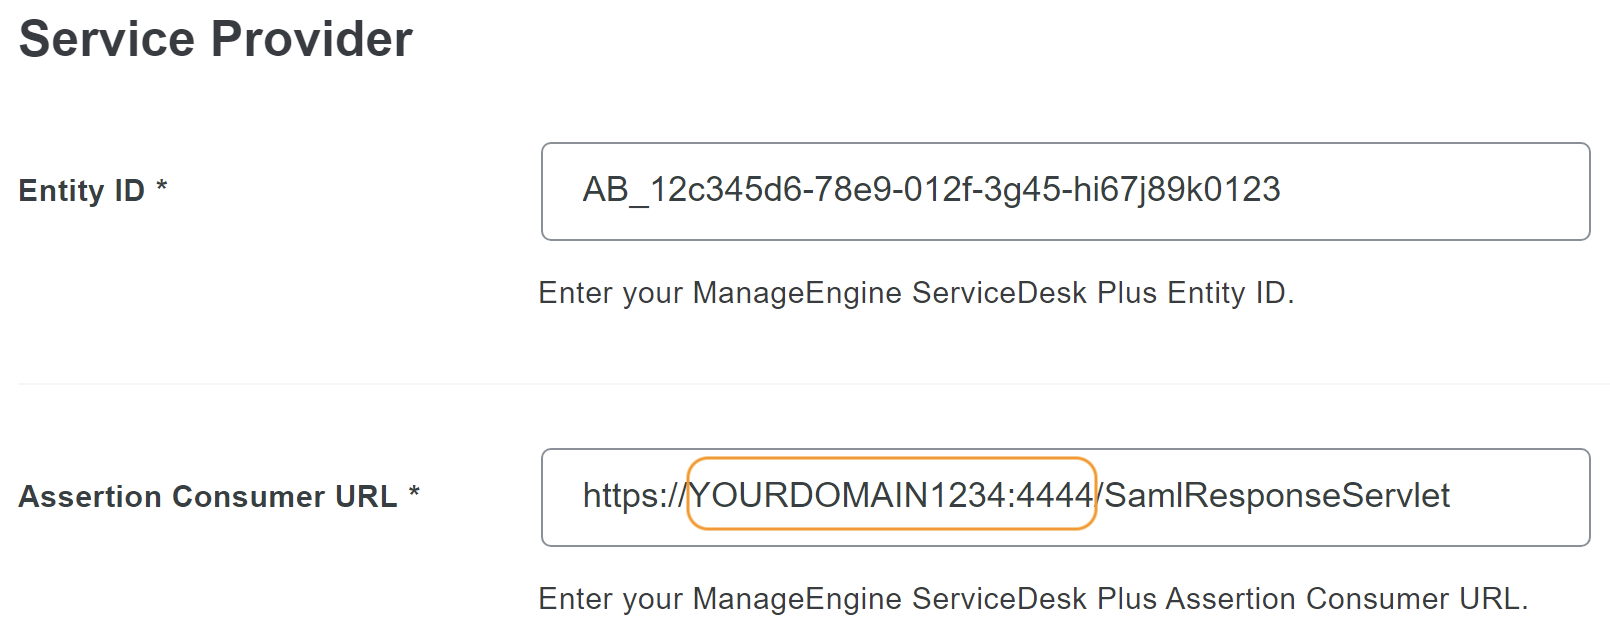 Duo ManageEngine ServiceDesk Plus Service Provider Fields